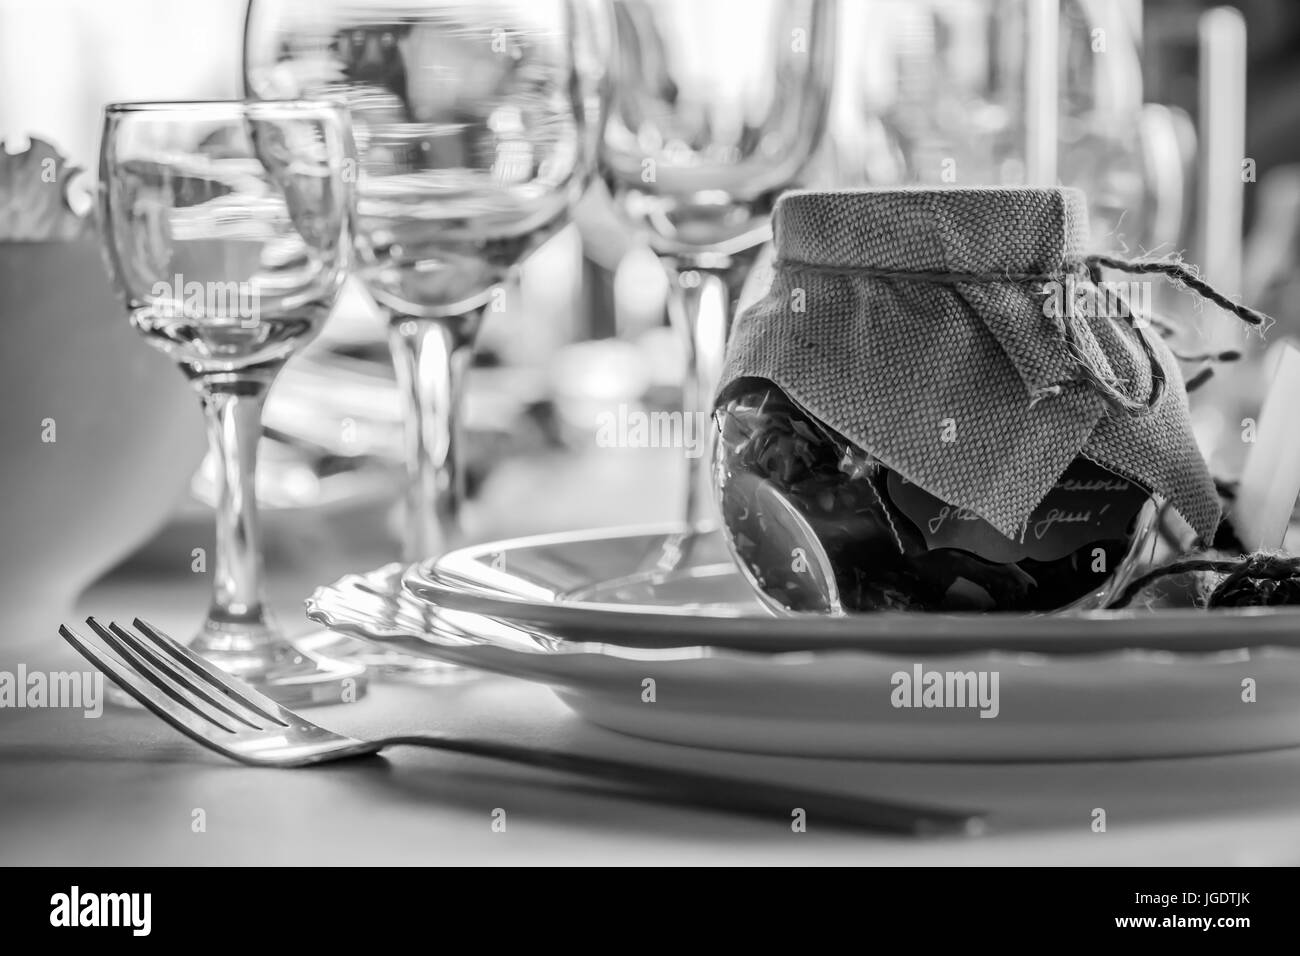 Rustic table setting for a wedding celebration in nice cozy restaurant. Wineglasses, plates and food on table. Guests complement in a rustic jar Stock Photo